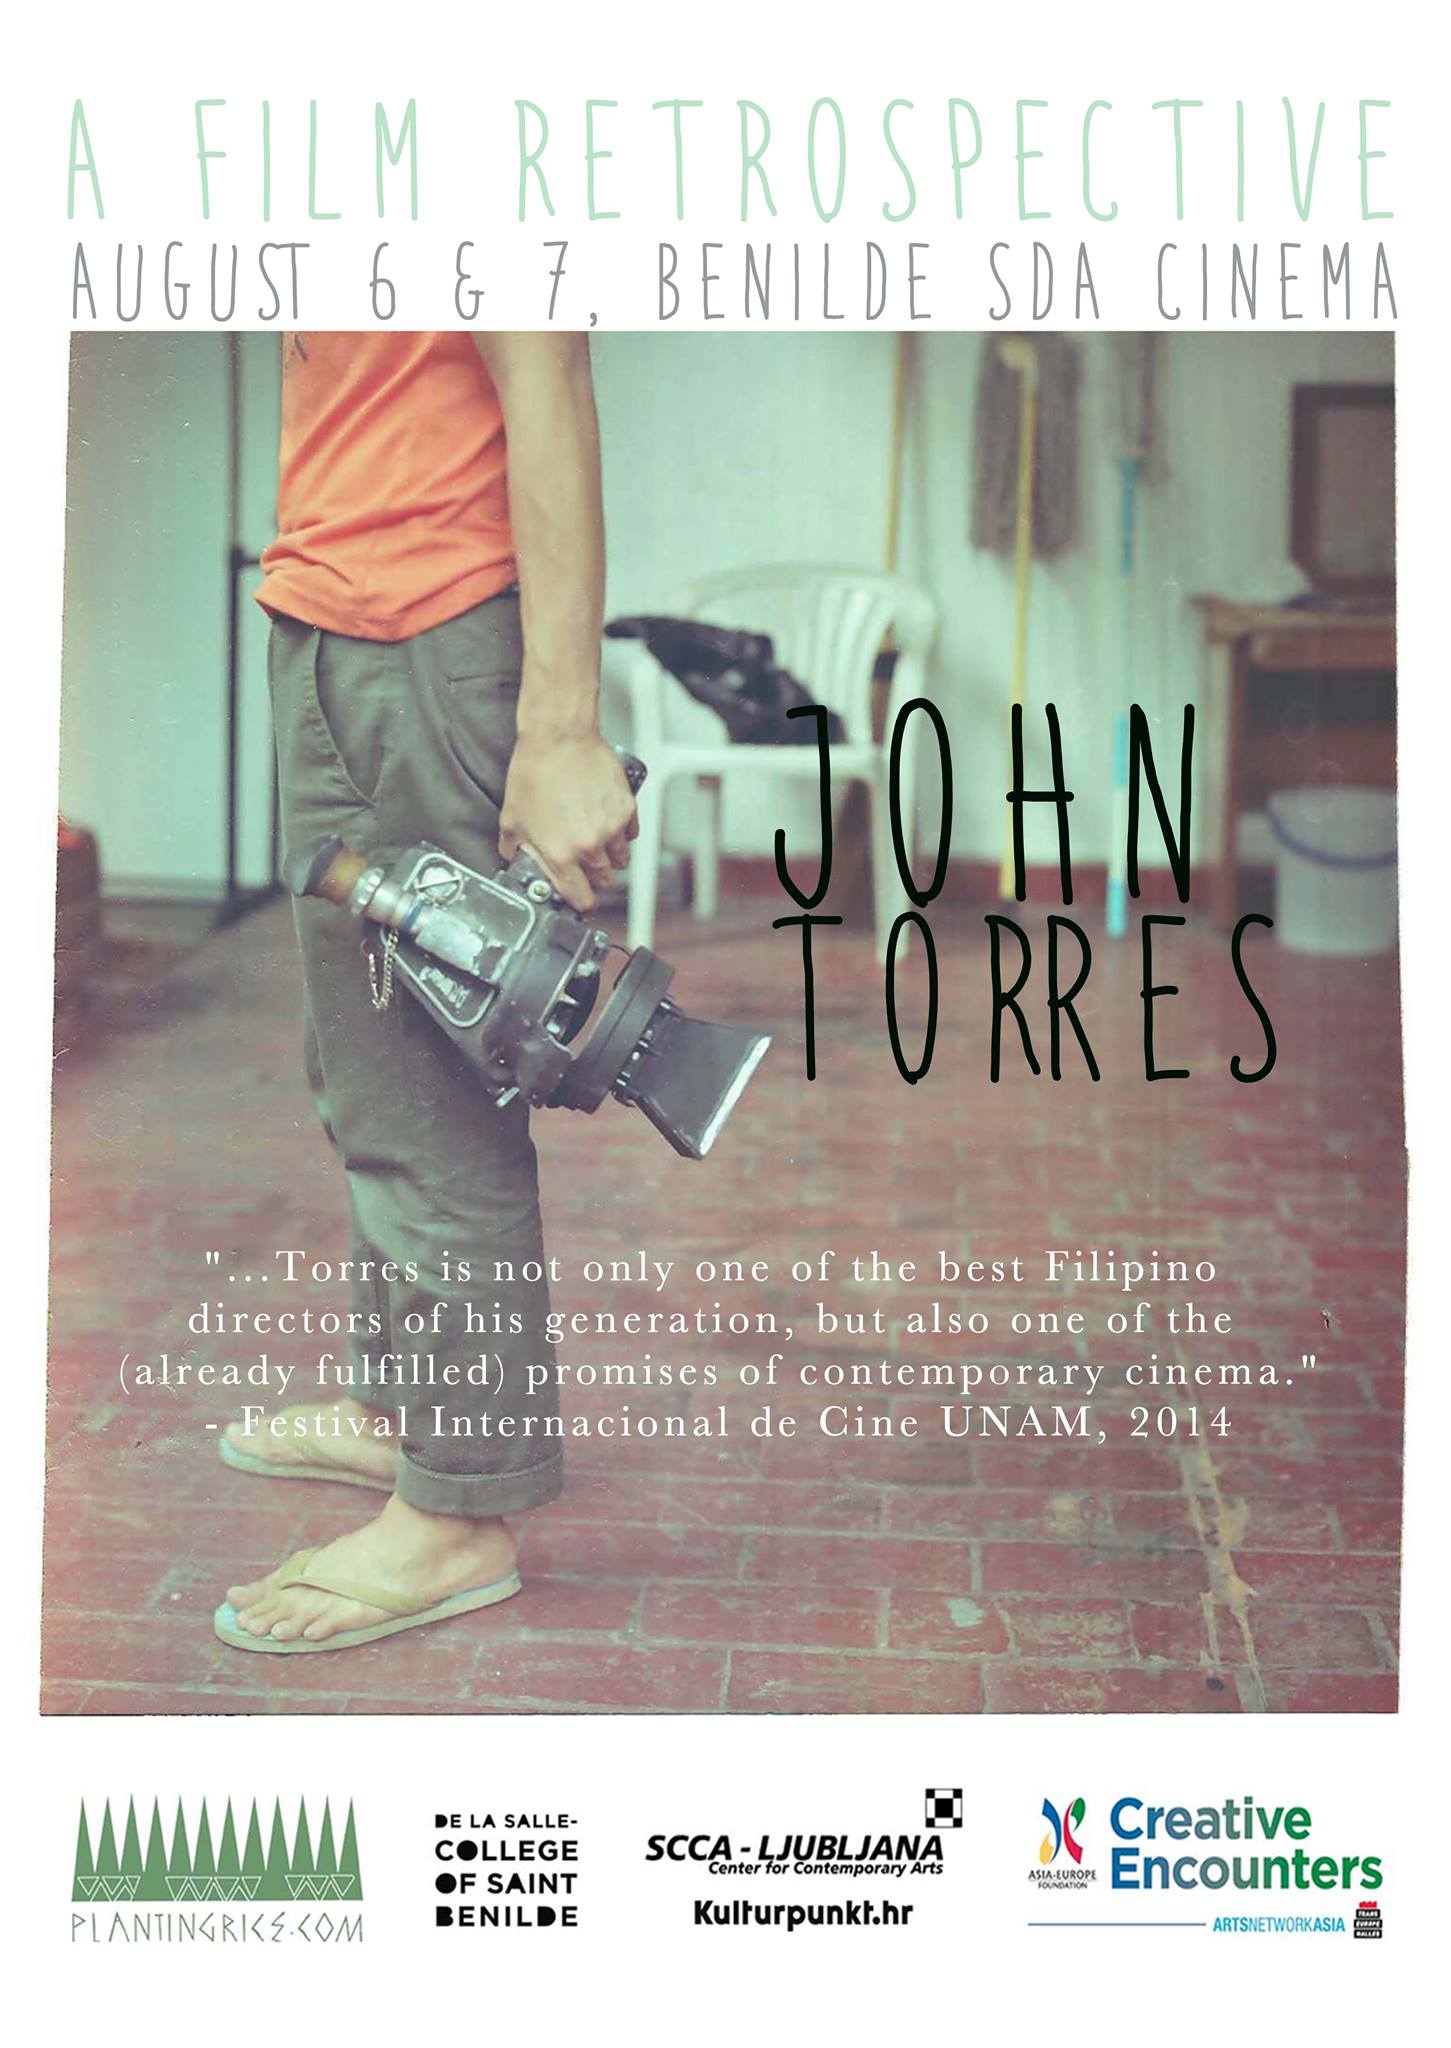 John Torres, A Film Retrospective August 6 - August 7 Aug 6 at 1:00pm to Aug 7 at 6:00pm Benilde SDA Cinema Invited by Planting Rice One of the most poetic filmmakers in Philippine underground cinema - John Torres screens a 2-day retrospective at Benilde Cinema, School of Design & Arts, Manila on August 6&7 1-6pm. A conversation with filmmaker John Torres and Arist/Curator Merv Espina follows on August 7 at 5pm. The screenings for August 6 and 7 are free and there are limited seats available. If you have not registered at our gmail address, please RSVP at http://peatix.com/event/105958/view Film Screening Day 1 6 August Thursday Benilde SDA Cinema 13.00 Short Films Program Tawidgutom (2004) Salat (2004) Hai, They Recycle Heartbreaks in Tokyo So Nothing’s Wasted (2009) Very Specific Things At Night (2009) We Don’t Care For Democracy, This Is What We Want: Love And Hope And Its Many Faces (2010) Silent Film (2011) Muse (2011) Mapang-Akit (2011) 15.00 Todo Todo Teros (2008) 17.00 Years When I Was A Child Outside (2008) Film Screening Day 2 7 August Friday Benilde SDA Cinema 13.00 Refrains Happen Like A Revolution In A Song (2011) 15.00 Lukas The Strange (2013) 17-18.00 Talk/Conversation with John Torres and Merv Espina. The film screening is an annex program of curating-in-depth 2, a program co-presented by Planting Rice with the generous support of La Salle - St. Benilde and Asia-Europe Foundation from August 3-7 at Benilde, SDA.